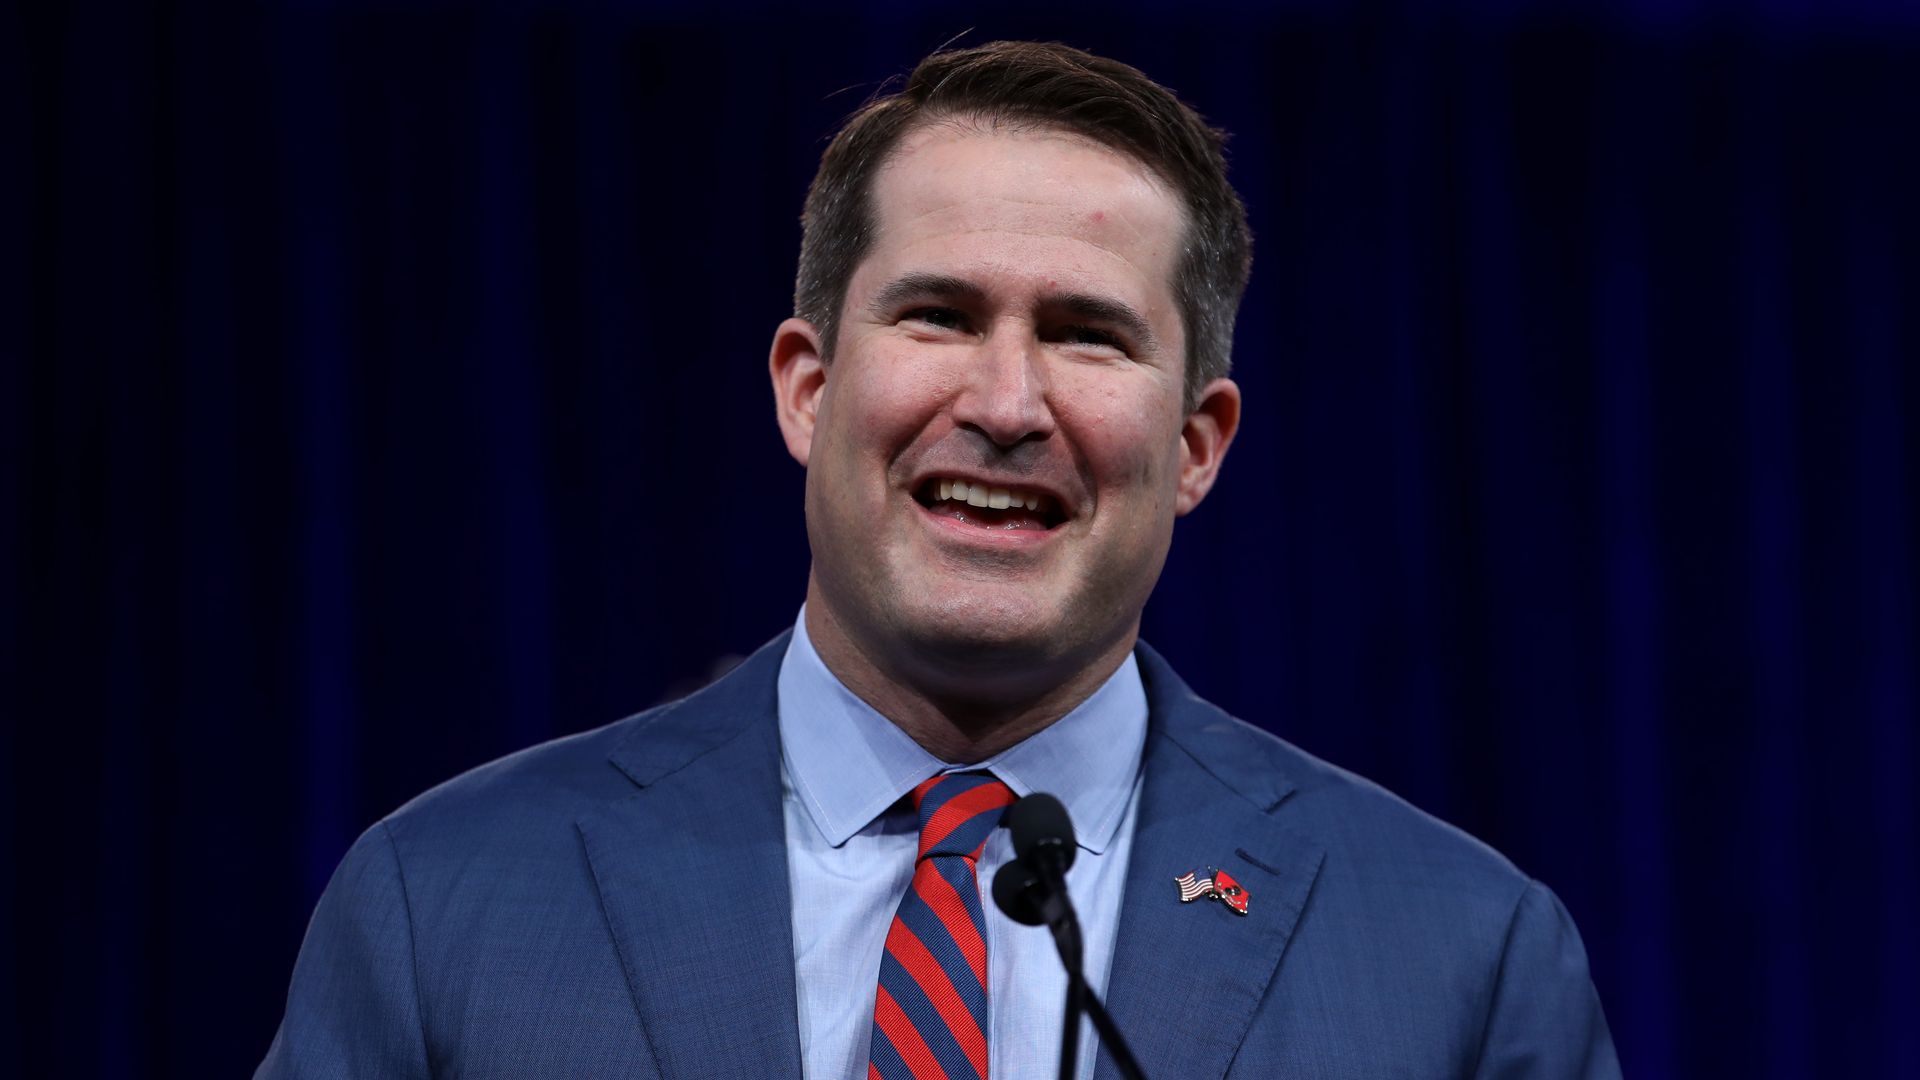 Rep. Seth Moulton is seen delivering a speech.